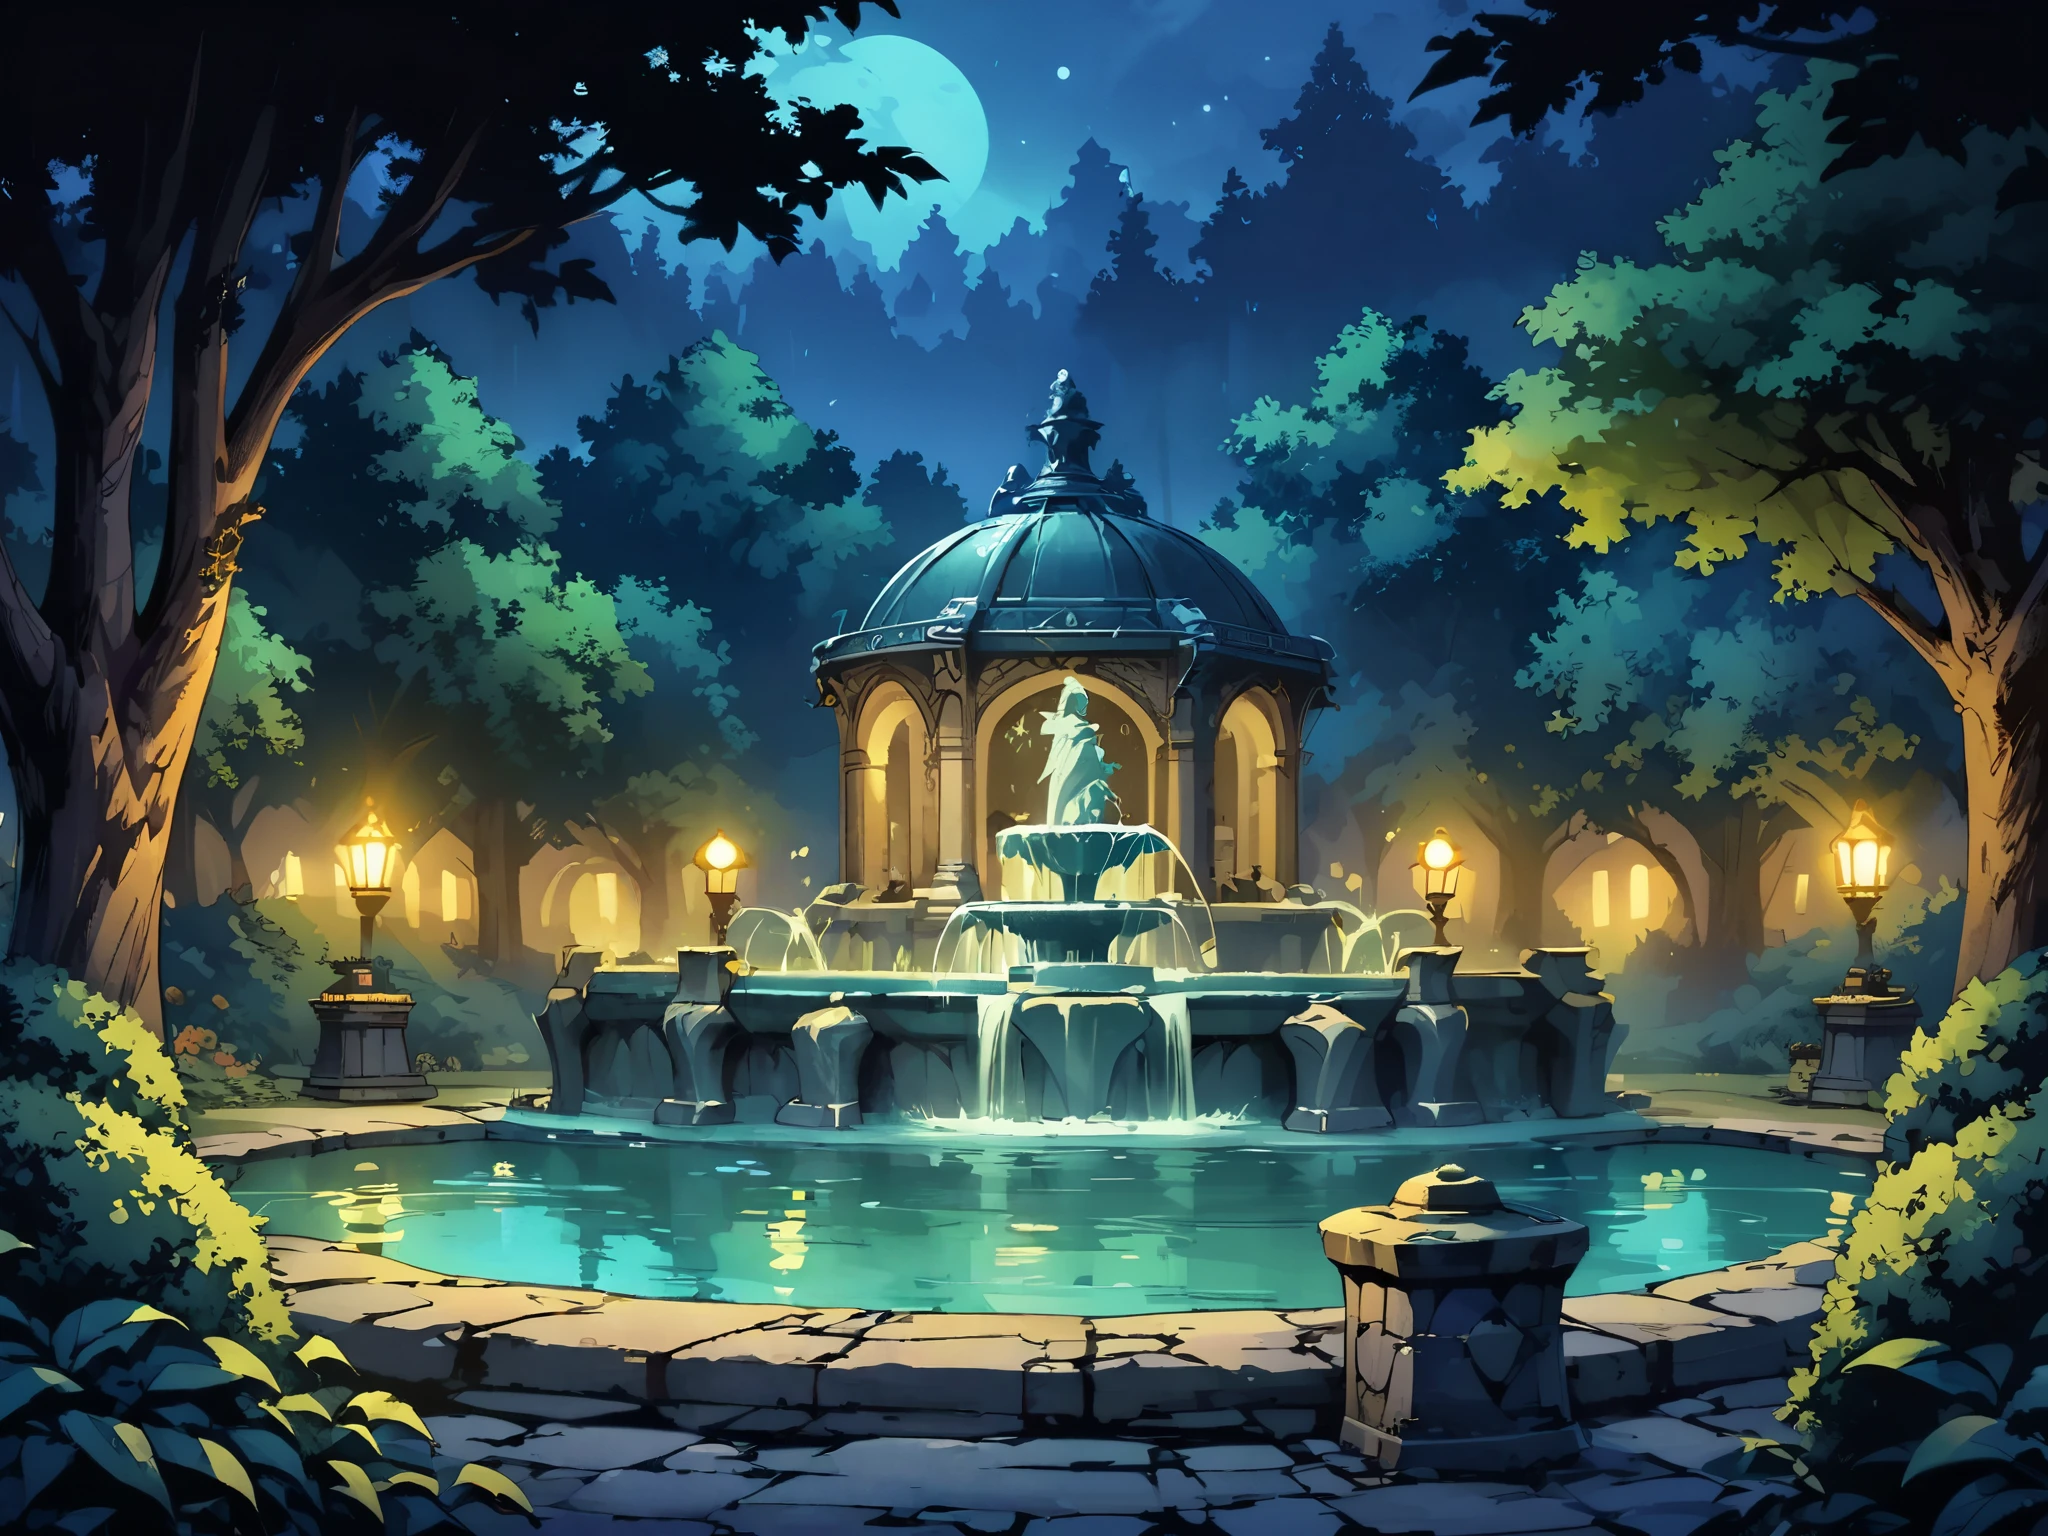 forest，The forest is shrouded in a mysterious glimmer，There is a lake in the forest，There is a magic spring in the middle of the lake(European medieval style fountain)，The lake is surrounded by only bushes and trees.，night，Night view。Mid-ground composition，Panorama pictures，Scene screen，Game concept art style，Anime illustration style，HD，4K。